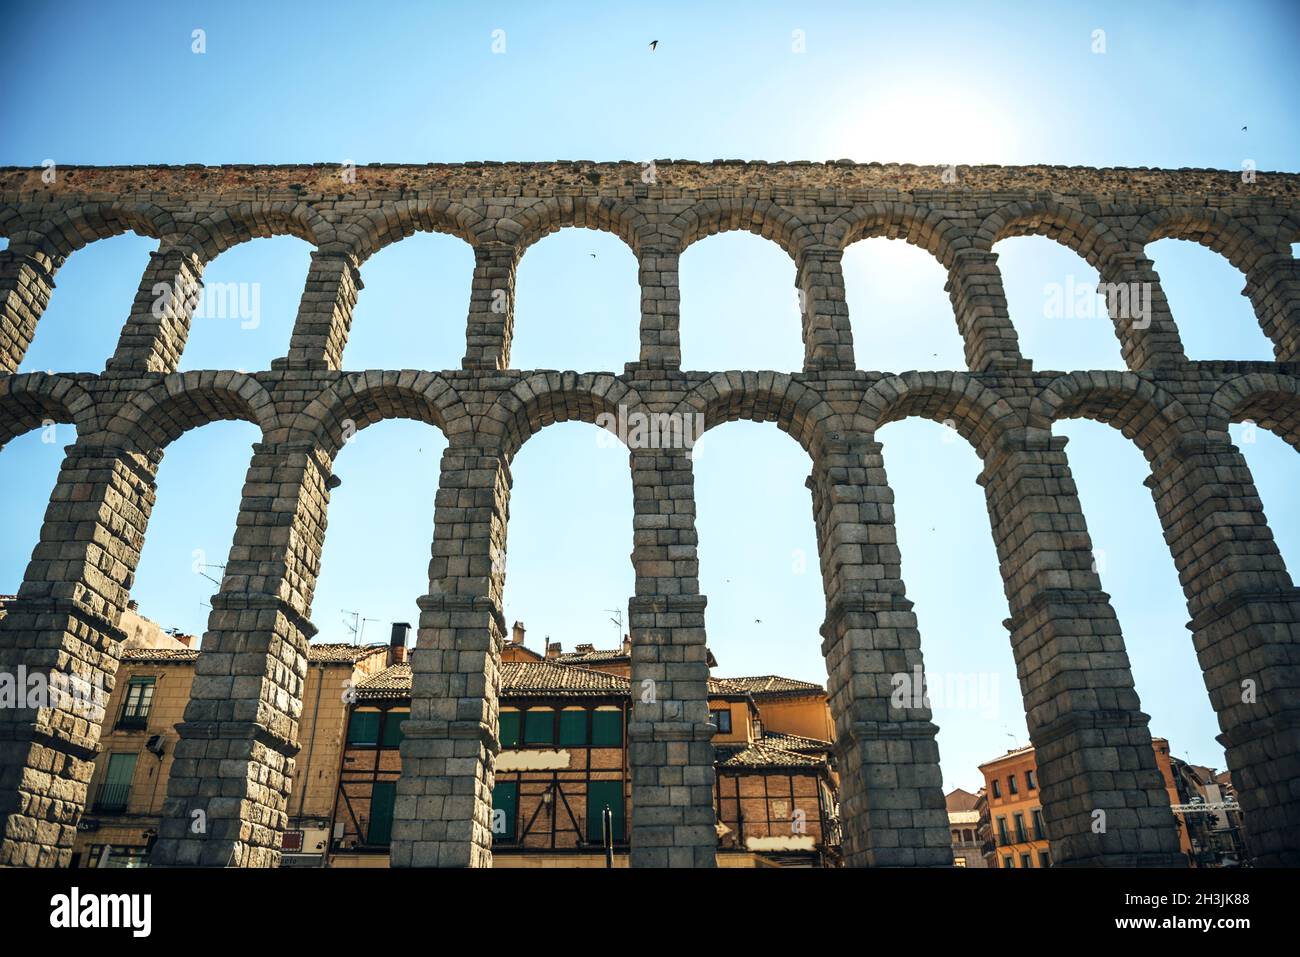 The famous ancient aqueduct in Segovia, Spain Stock Photo